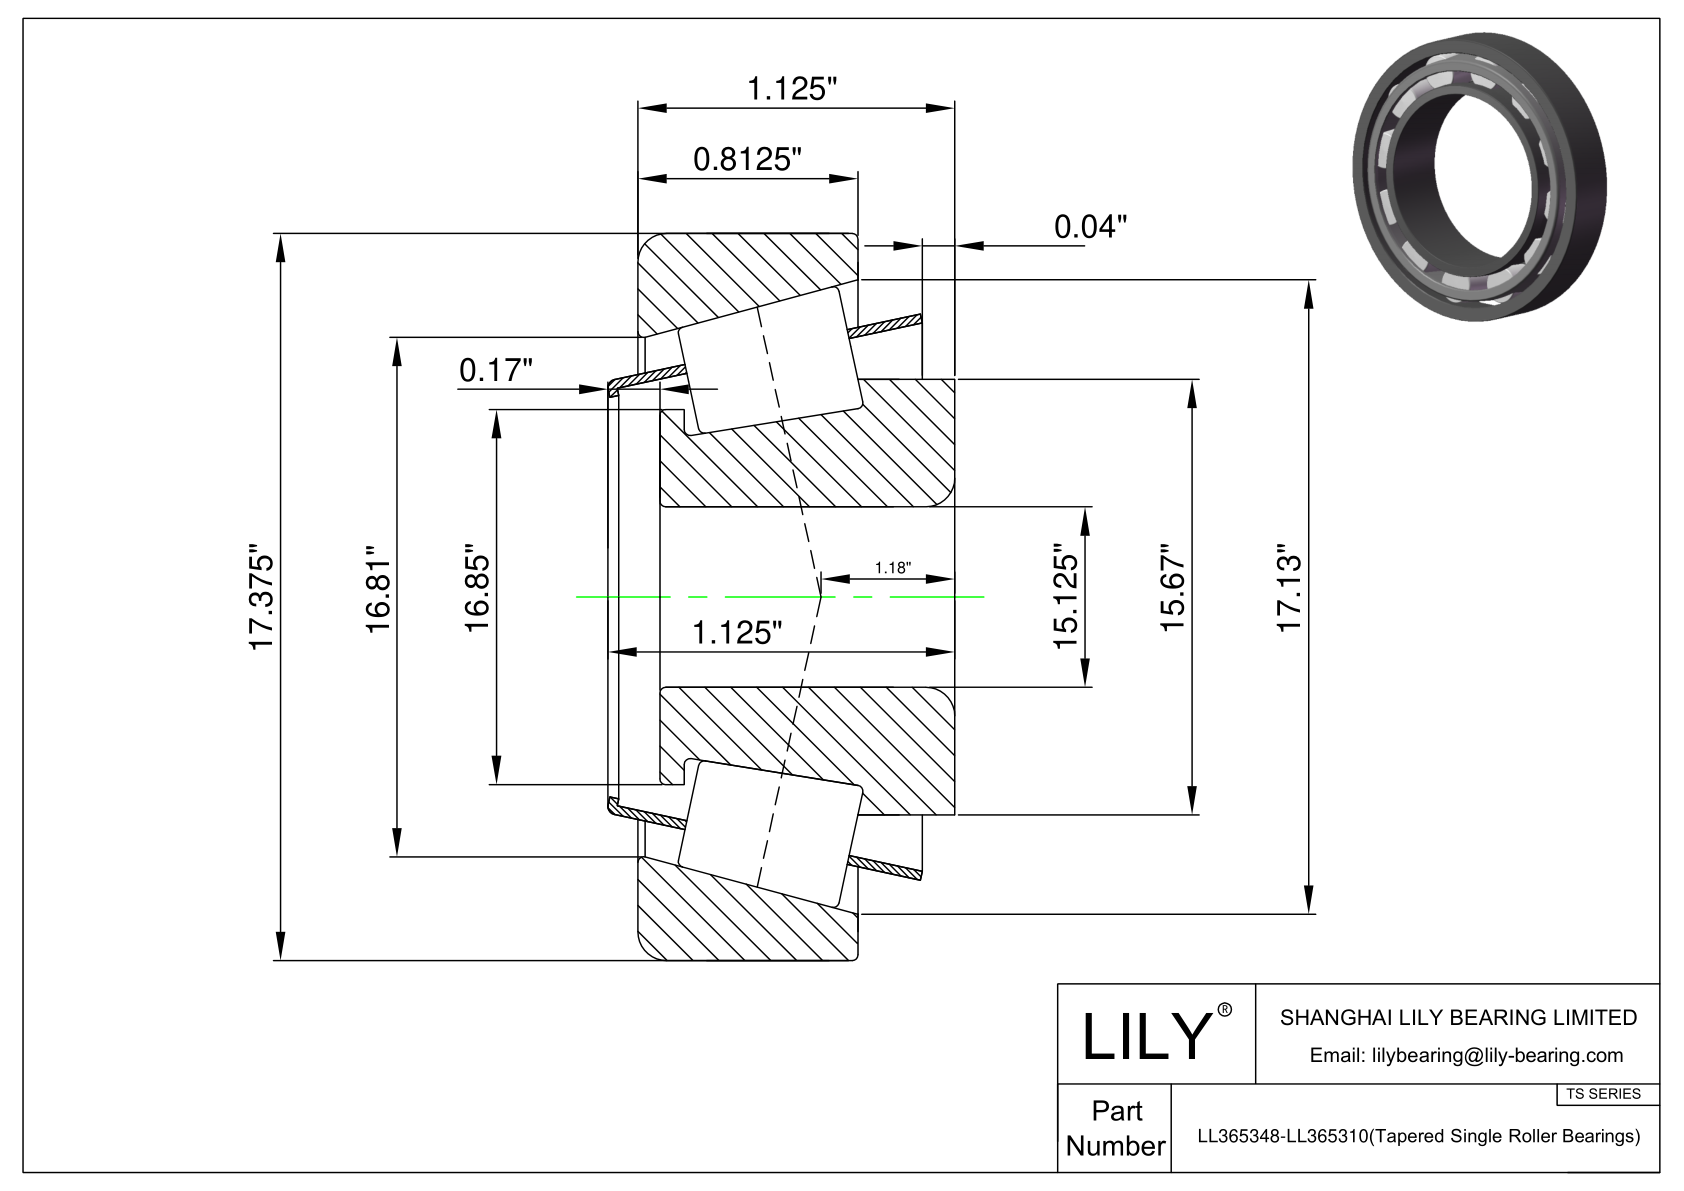 LL365348-LL365310 TS (Tapered Single Roller Bearings) (Imperial) cad drawing